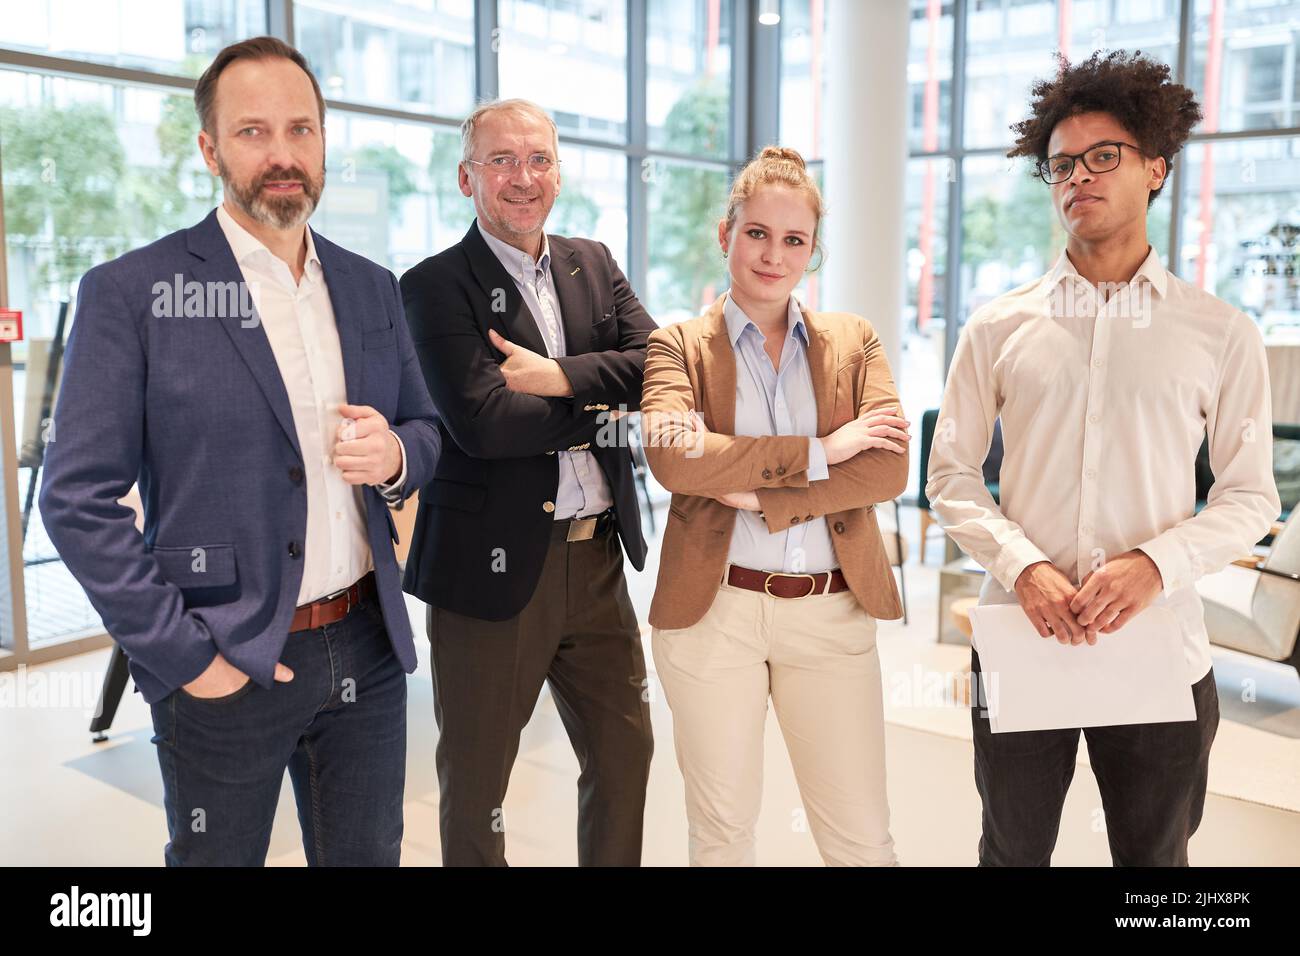 Confident and successful business team with senior boss and young colleagues Stock Photo